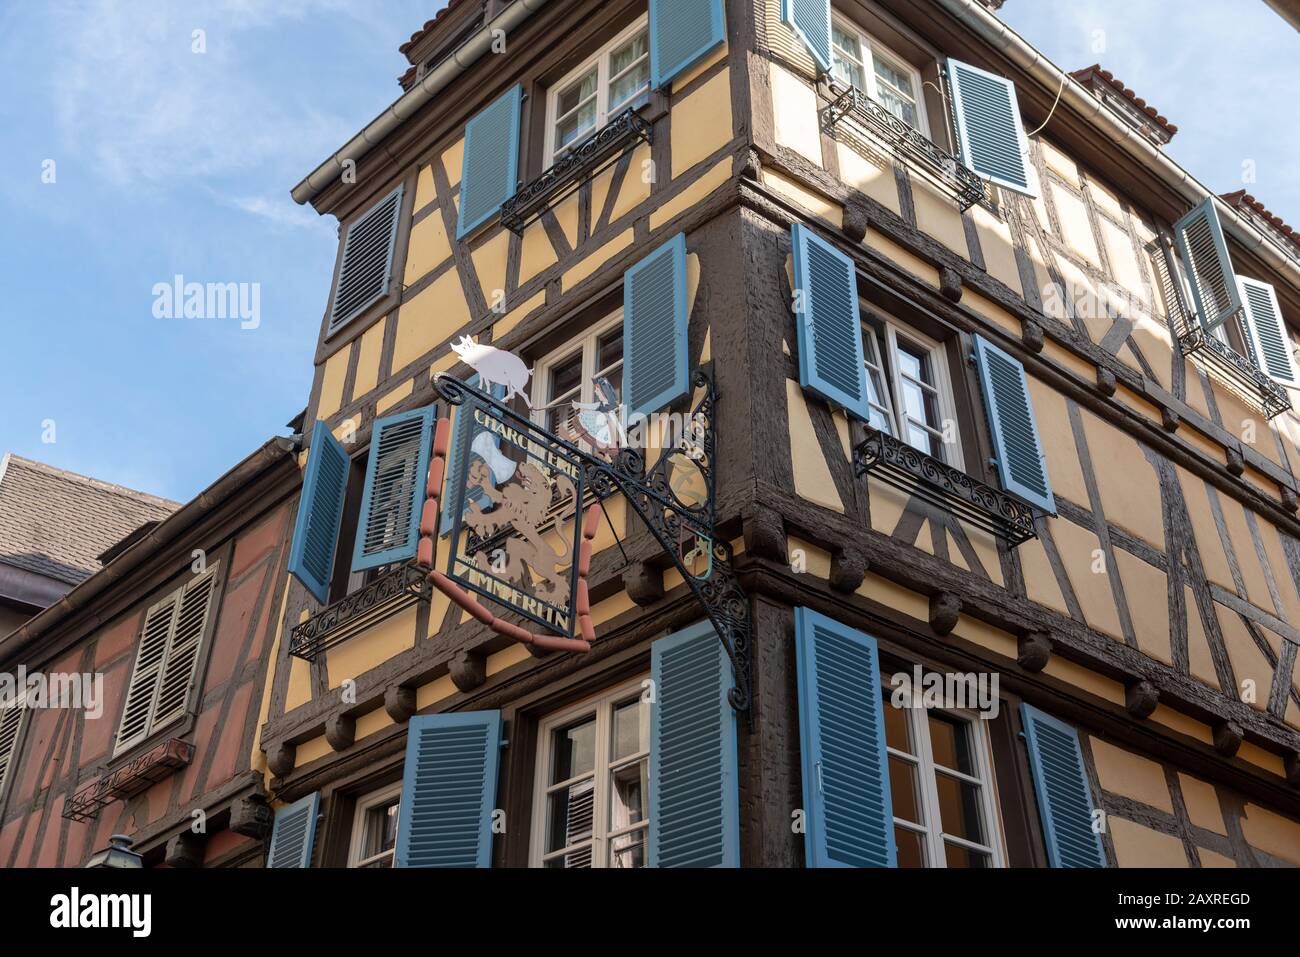 France, Alsace, Colmar, butcher's sign in the old town. Stock Photo